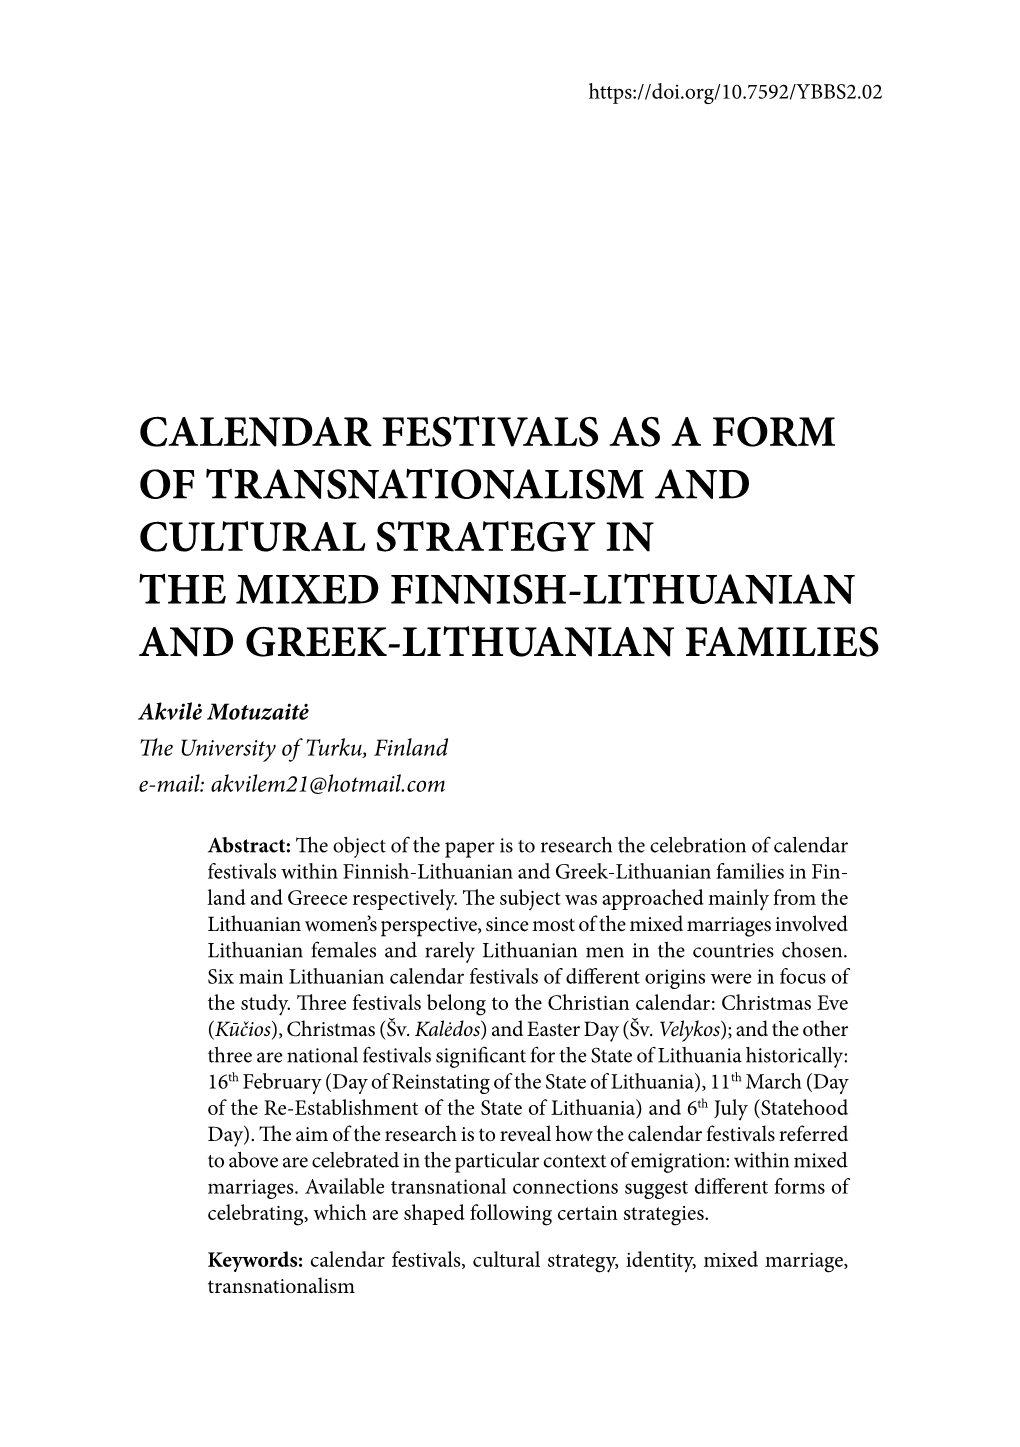 Calendar Festivals As a Form of Transnationalism and Cultural Strategy in the Mixed Finnish-Lithuanian and Greek-Lithuanian Families